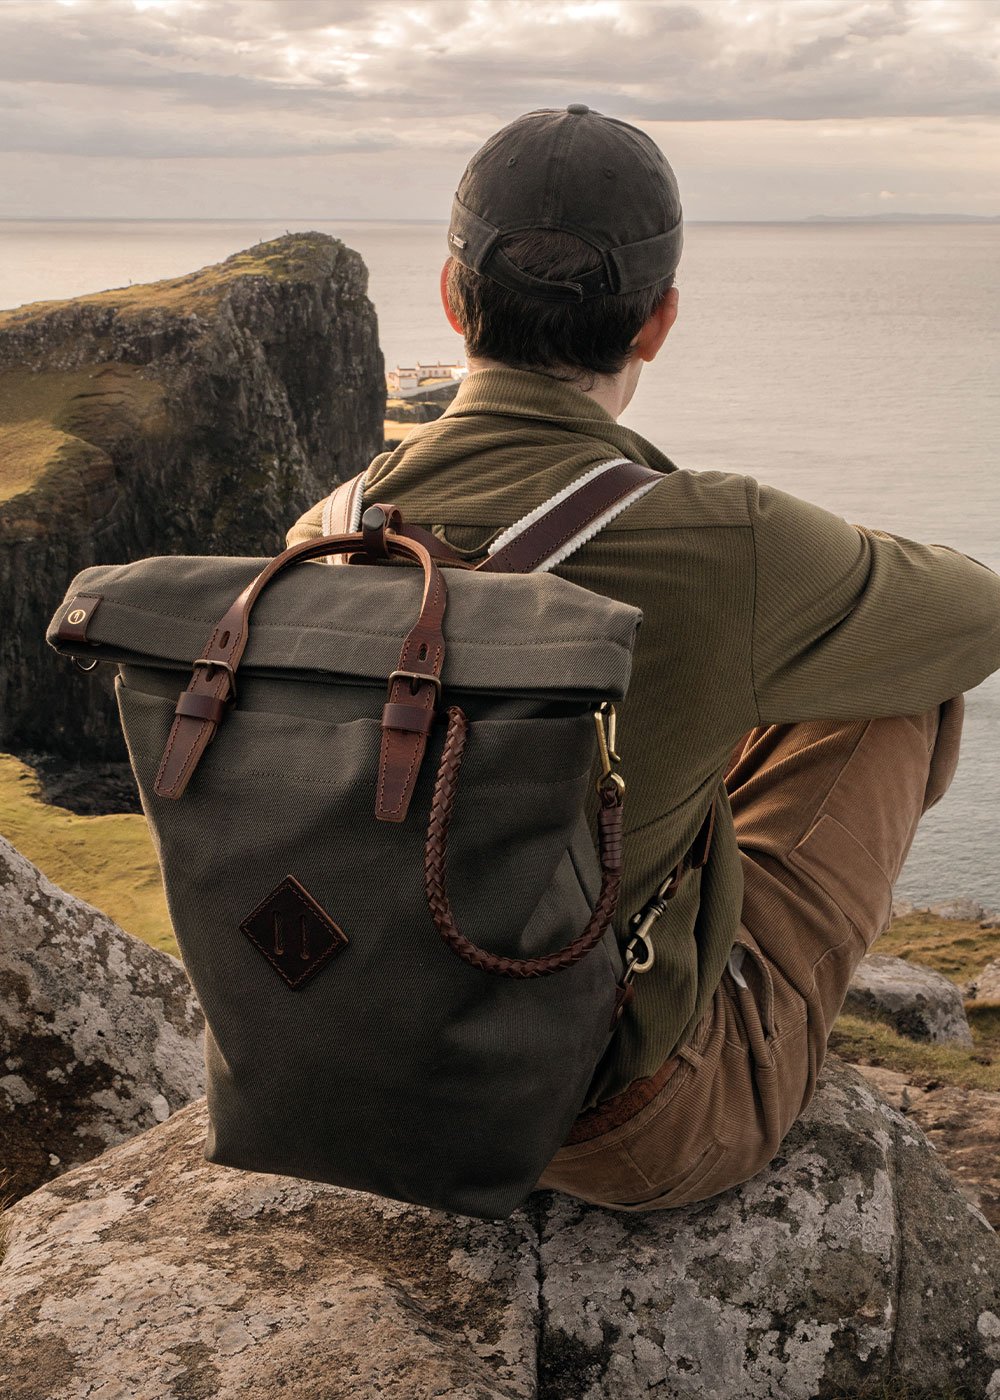 On the edge of a cliff, a man carries Woody's backpack